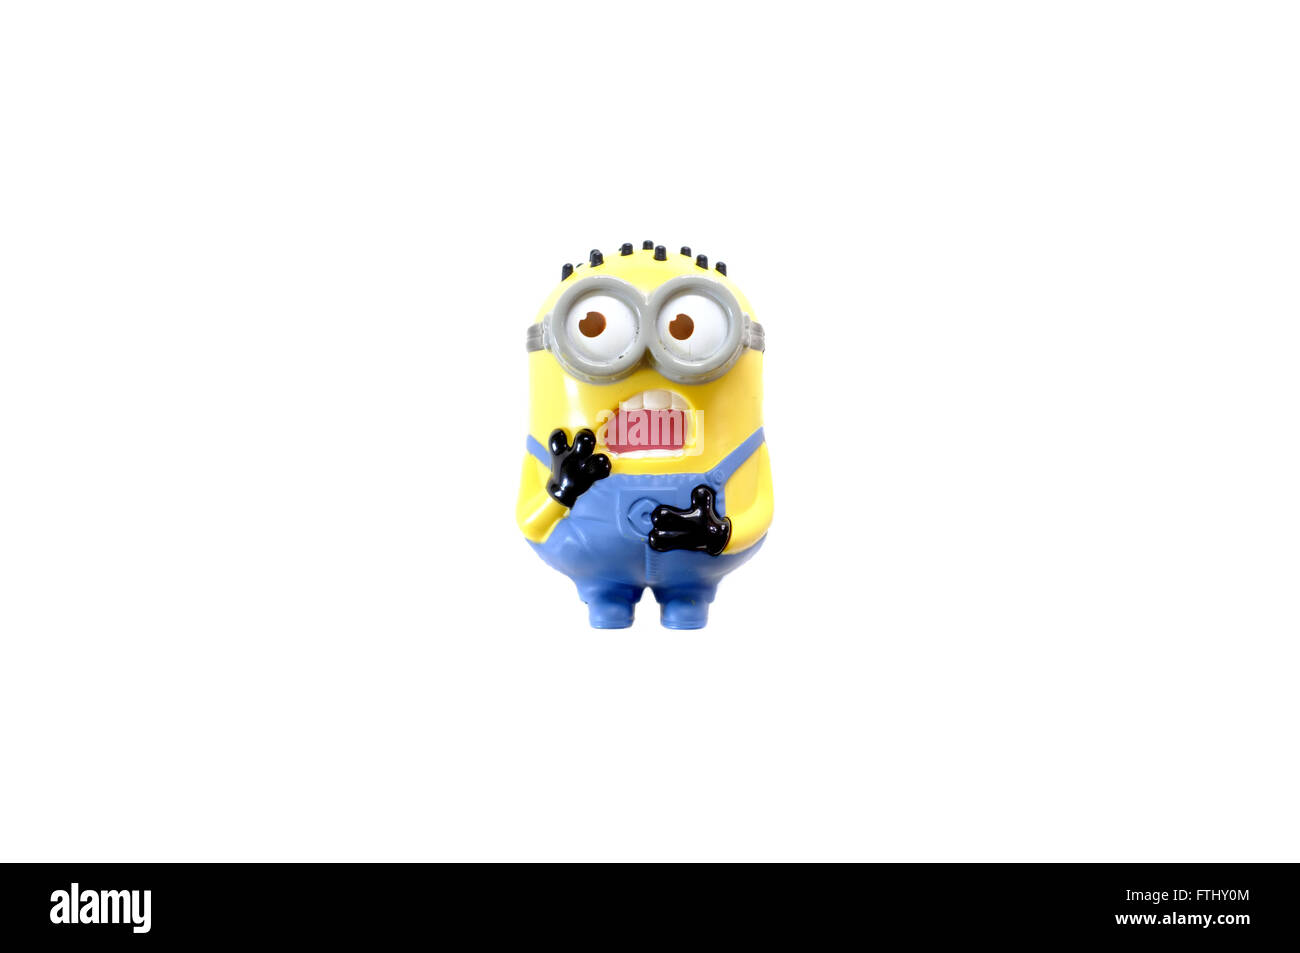 A toy figure from the Minions film photographed against a white background. Stock Photo